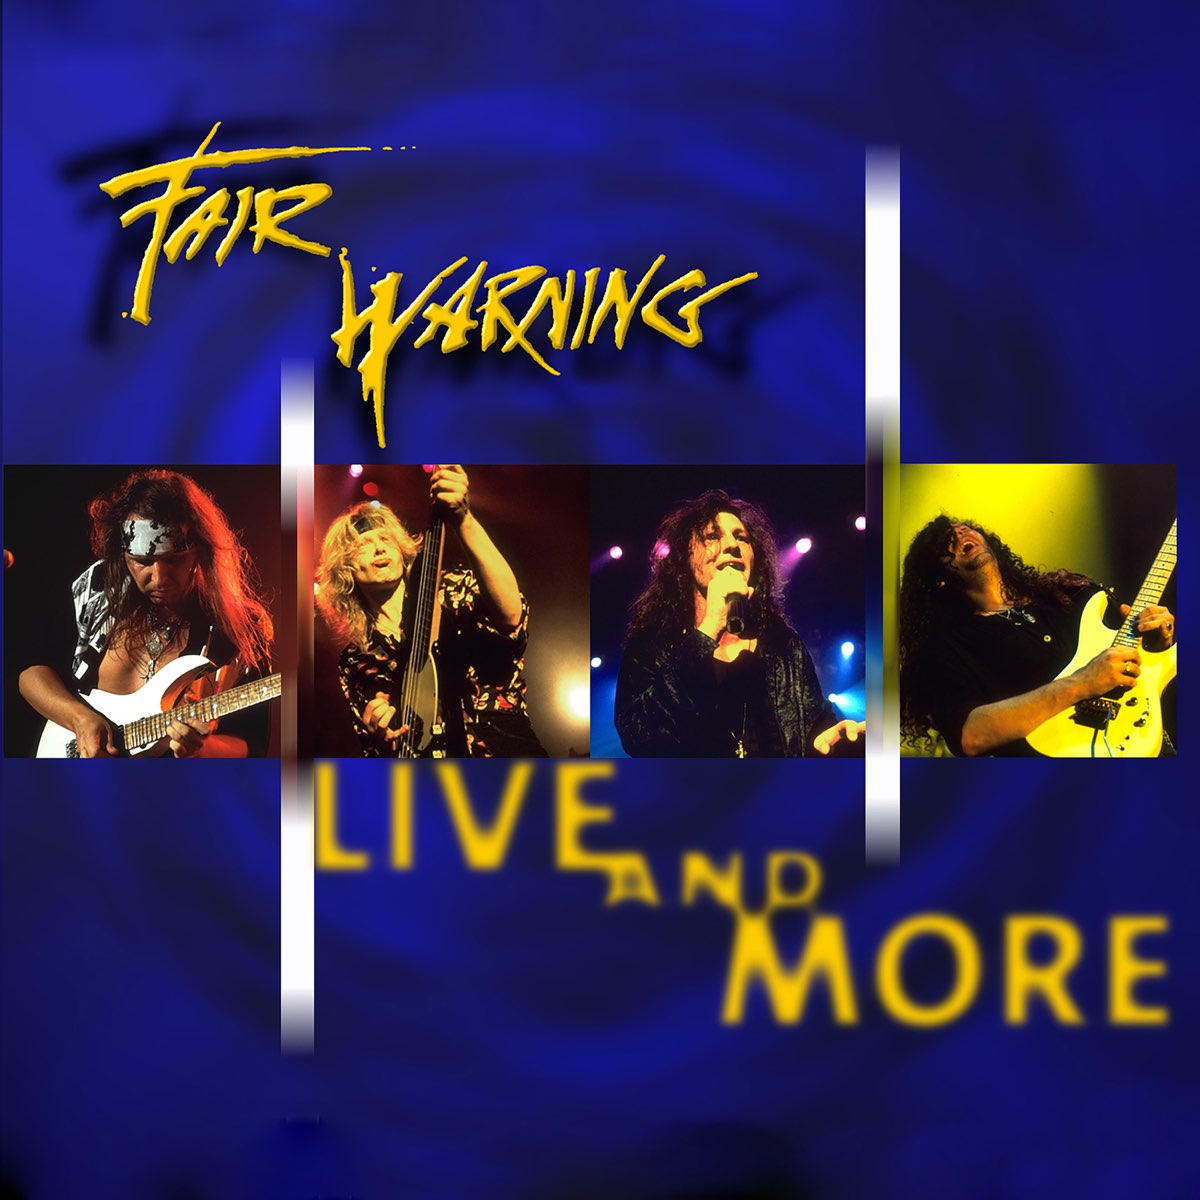 Live me more. Fair Warning - Live and more (1998). Fair Warning Live and more. More Live. The Warning Live.